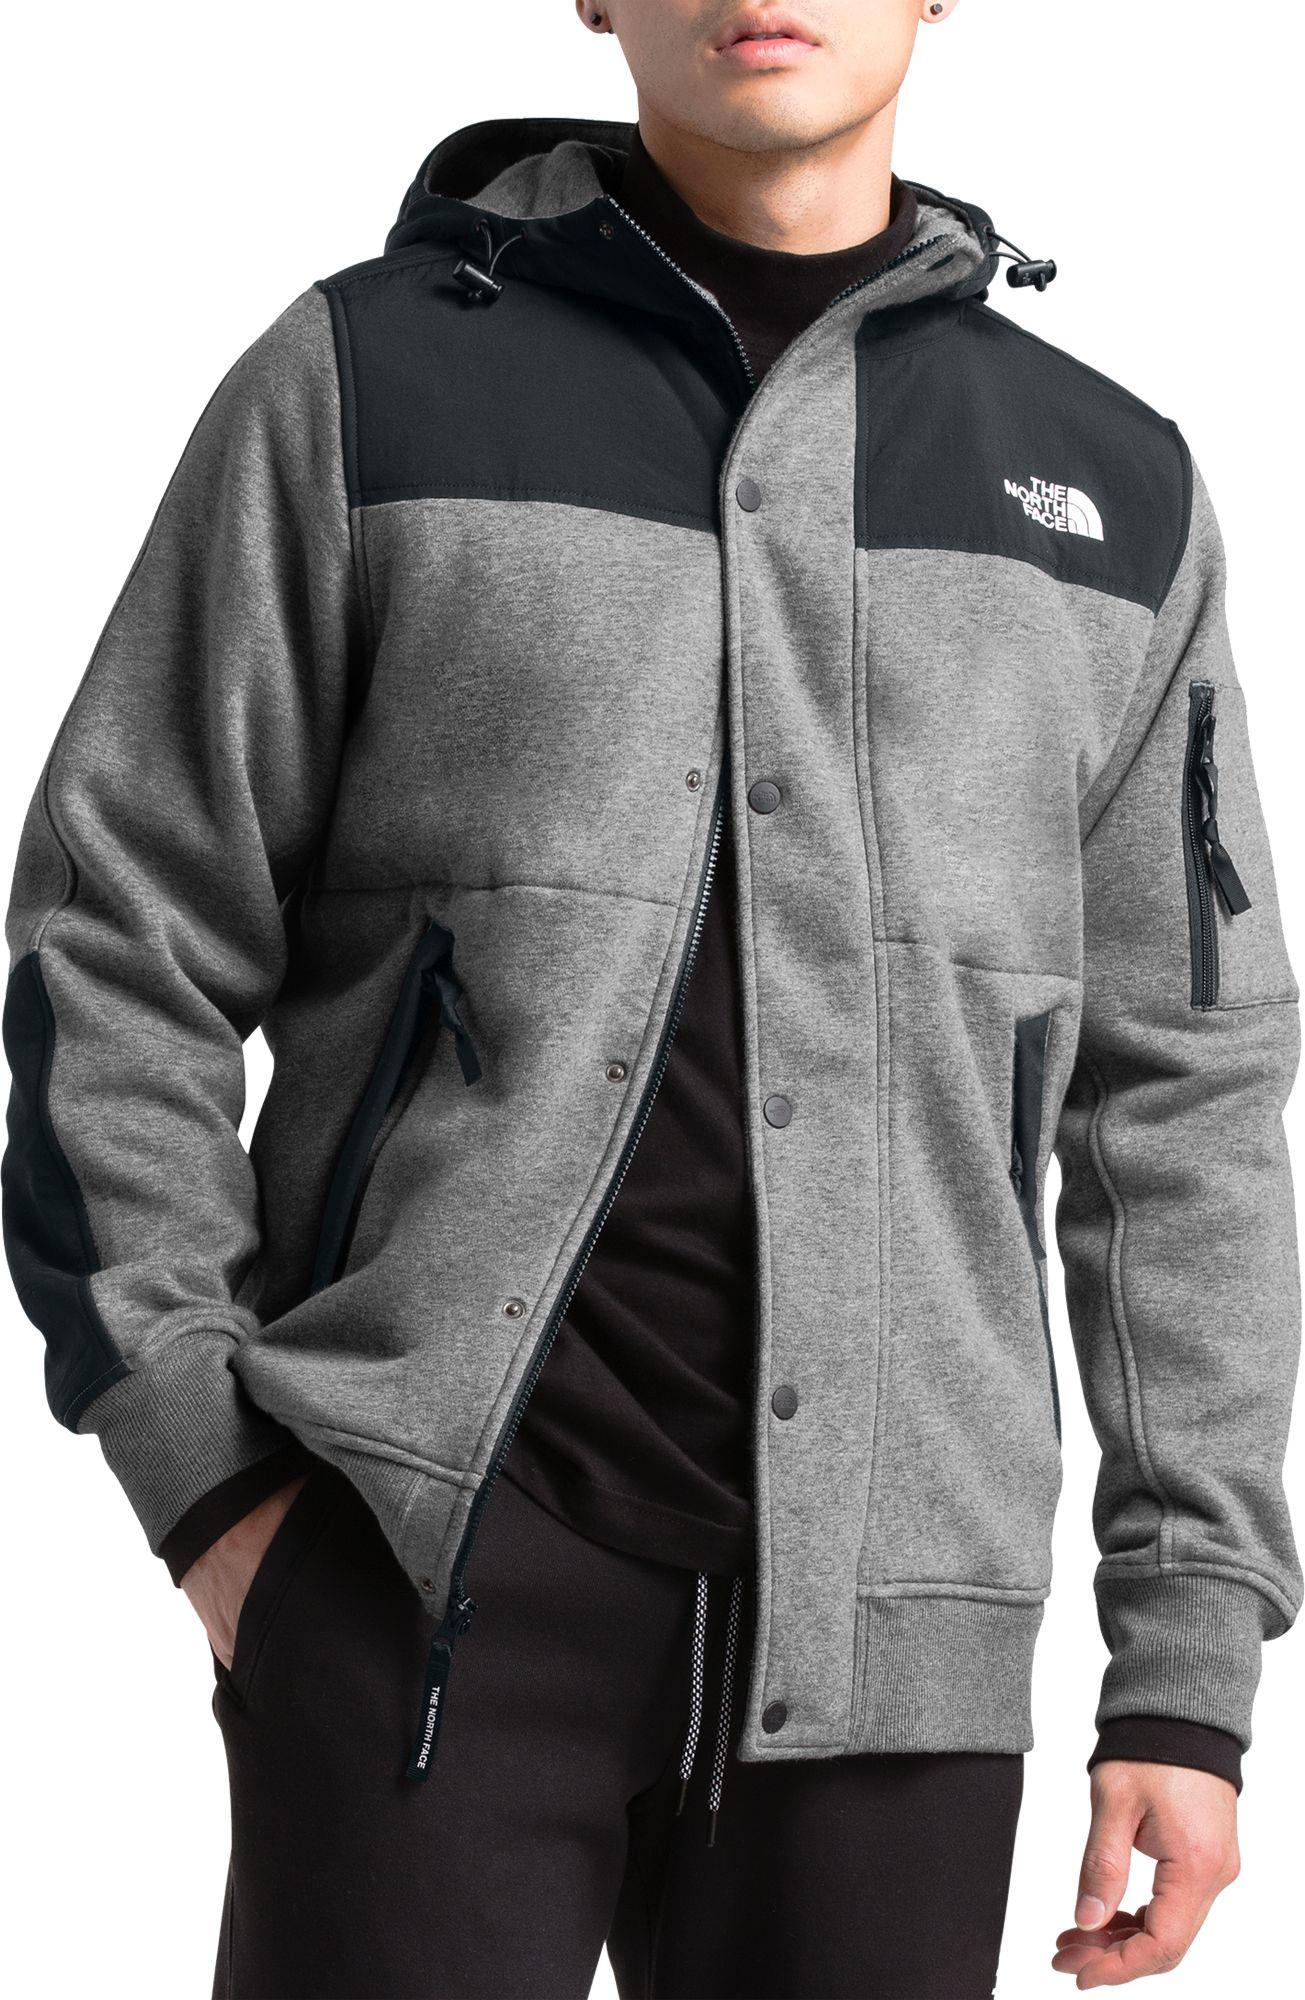 The North Face Sherpa Lined Rivington Fleece Jacket in Gray for Men - Lyst